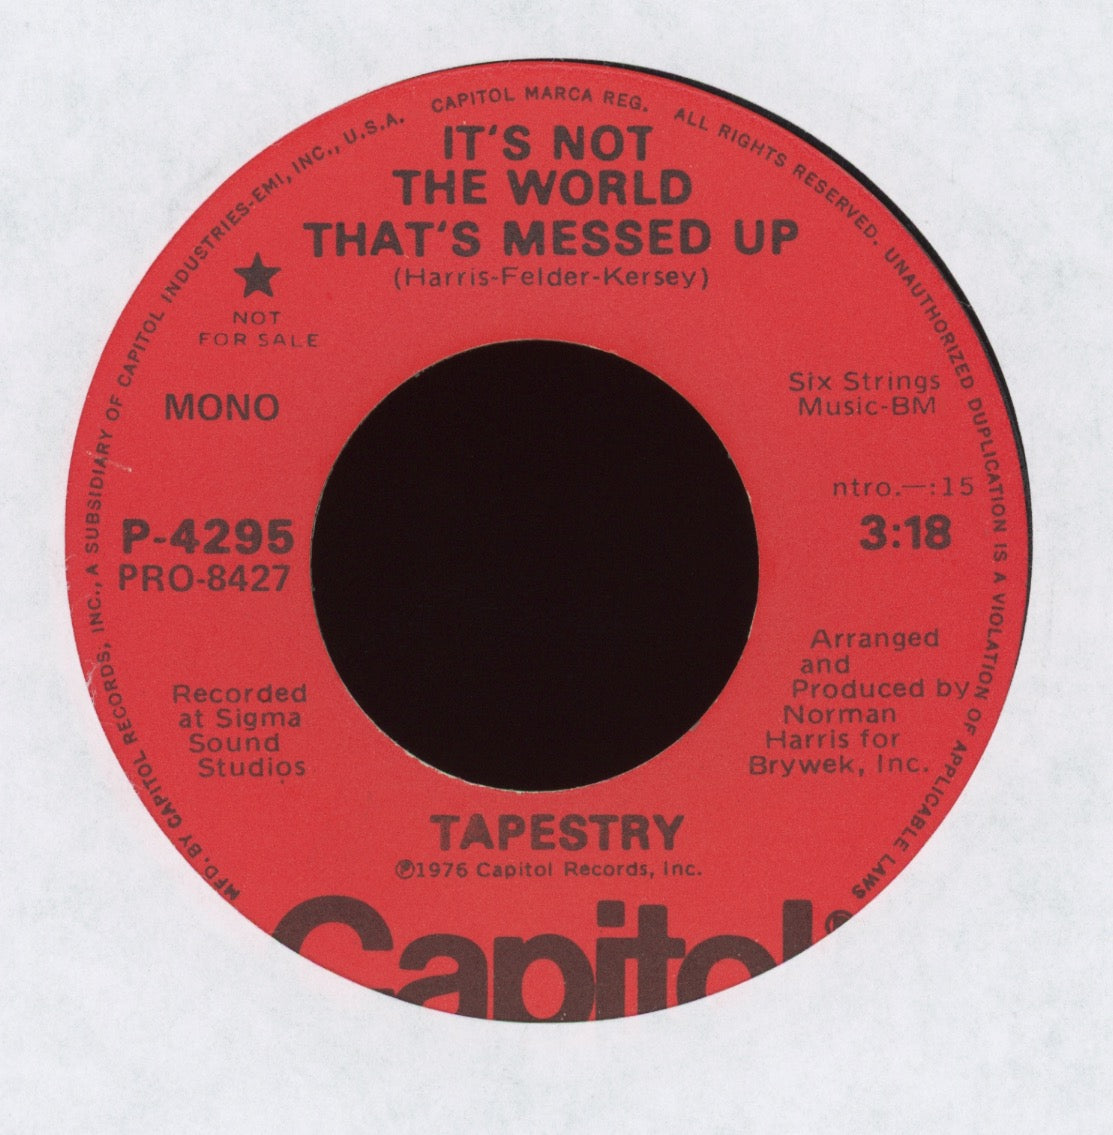 Tapestry - It's Not The World That's Messed Up on Capitol Promo